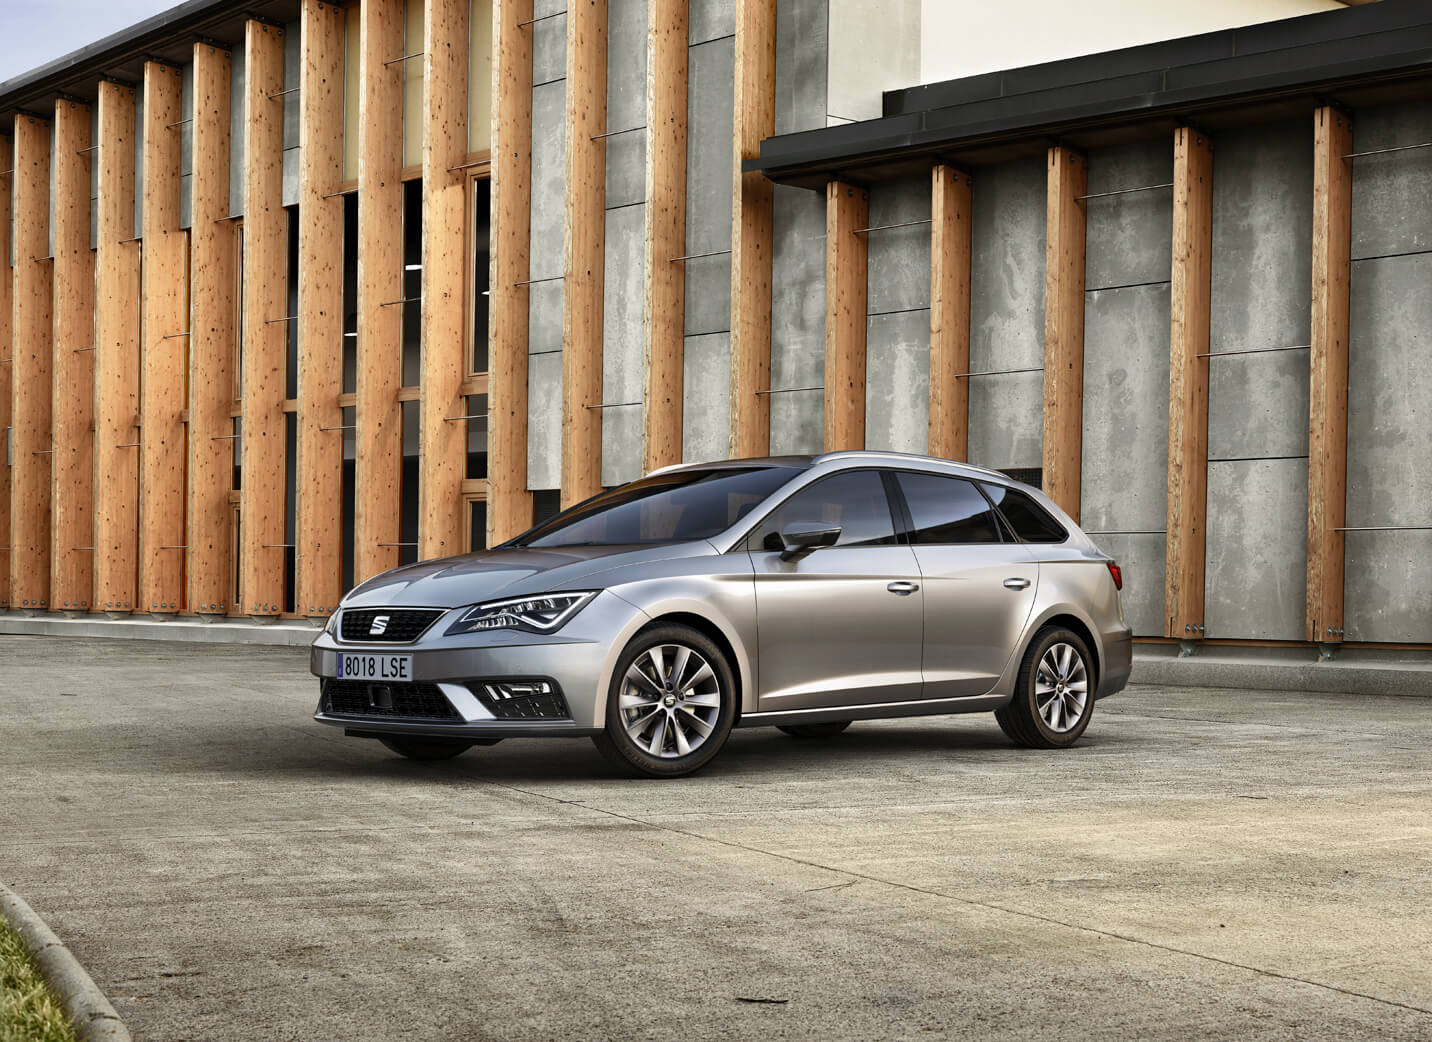 SEAT LEON ST parked on a street corner at night time: Fleets Award 2016 (Spain), Best Station Wagon of the Year (Turkey) – SEAT For Business Fleet services